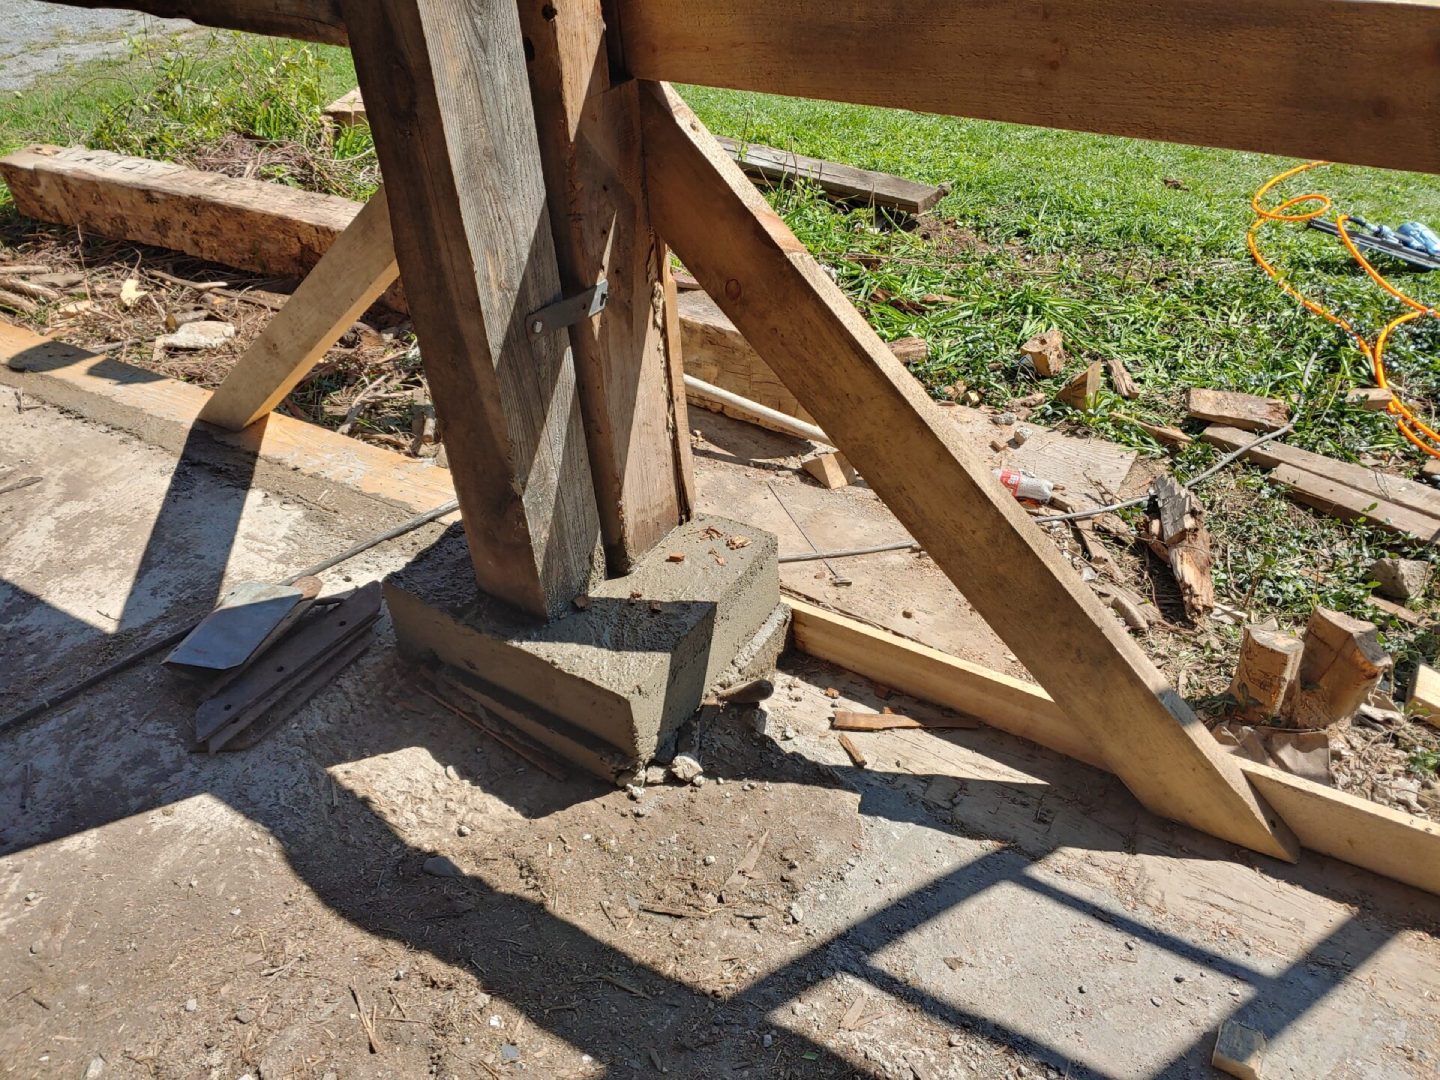 A wooden structure that has been cut off of the ground.